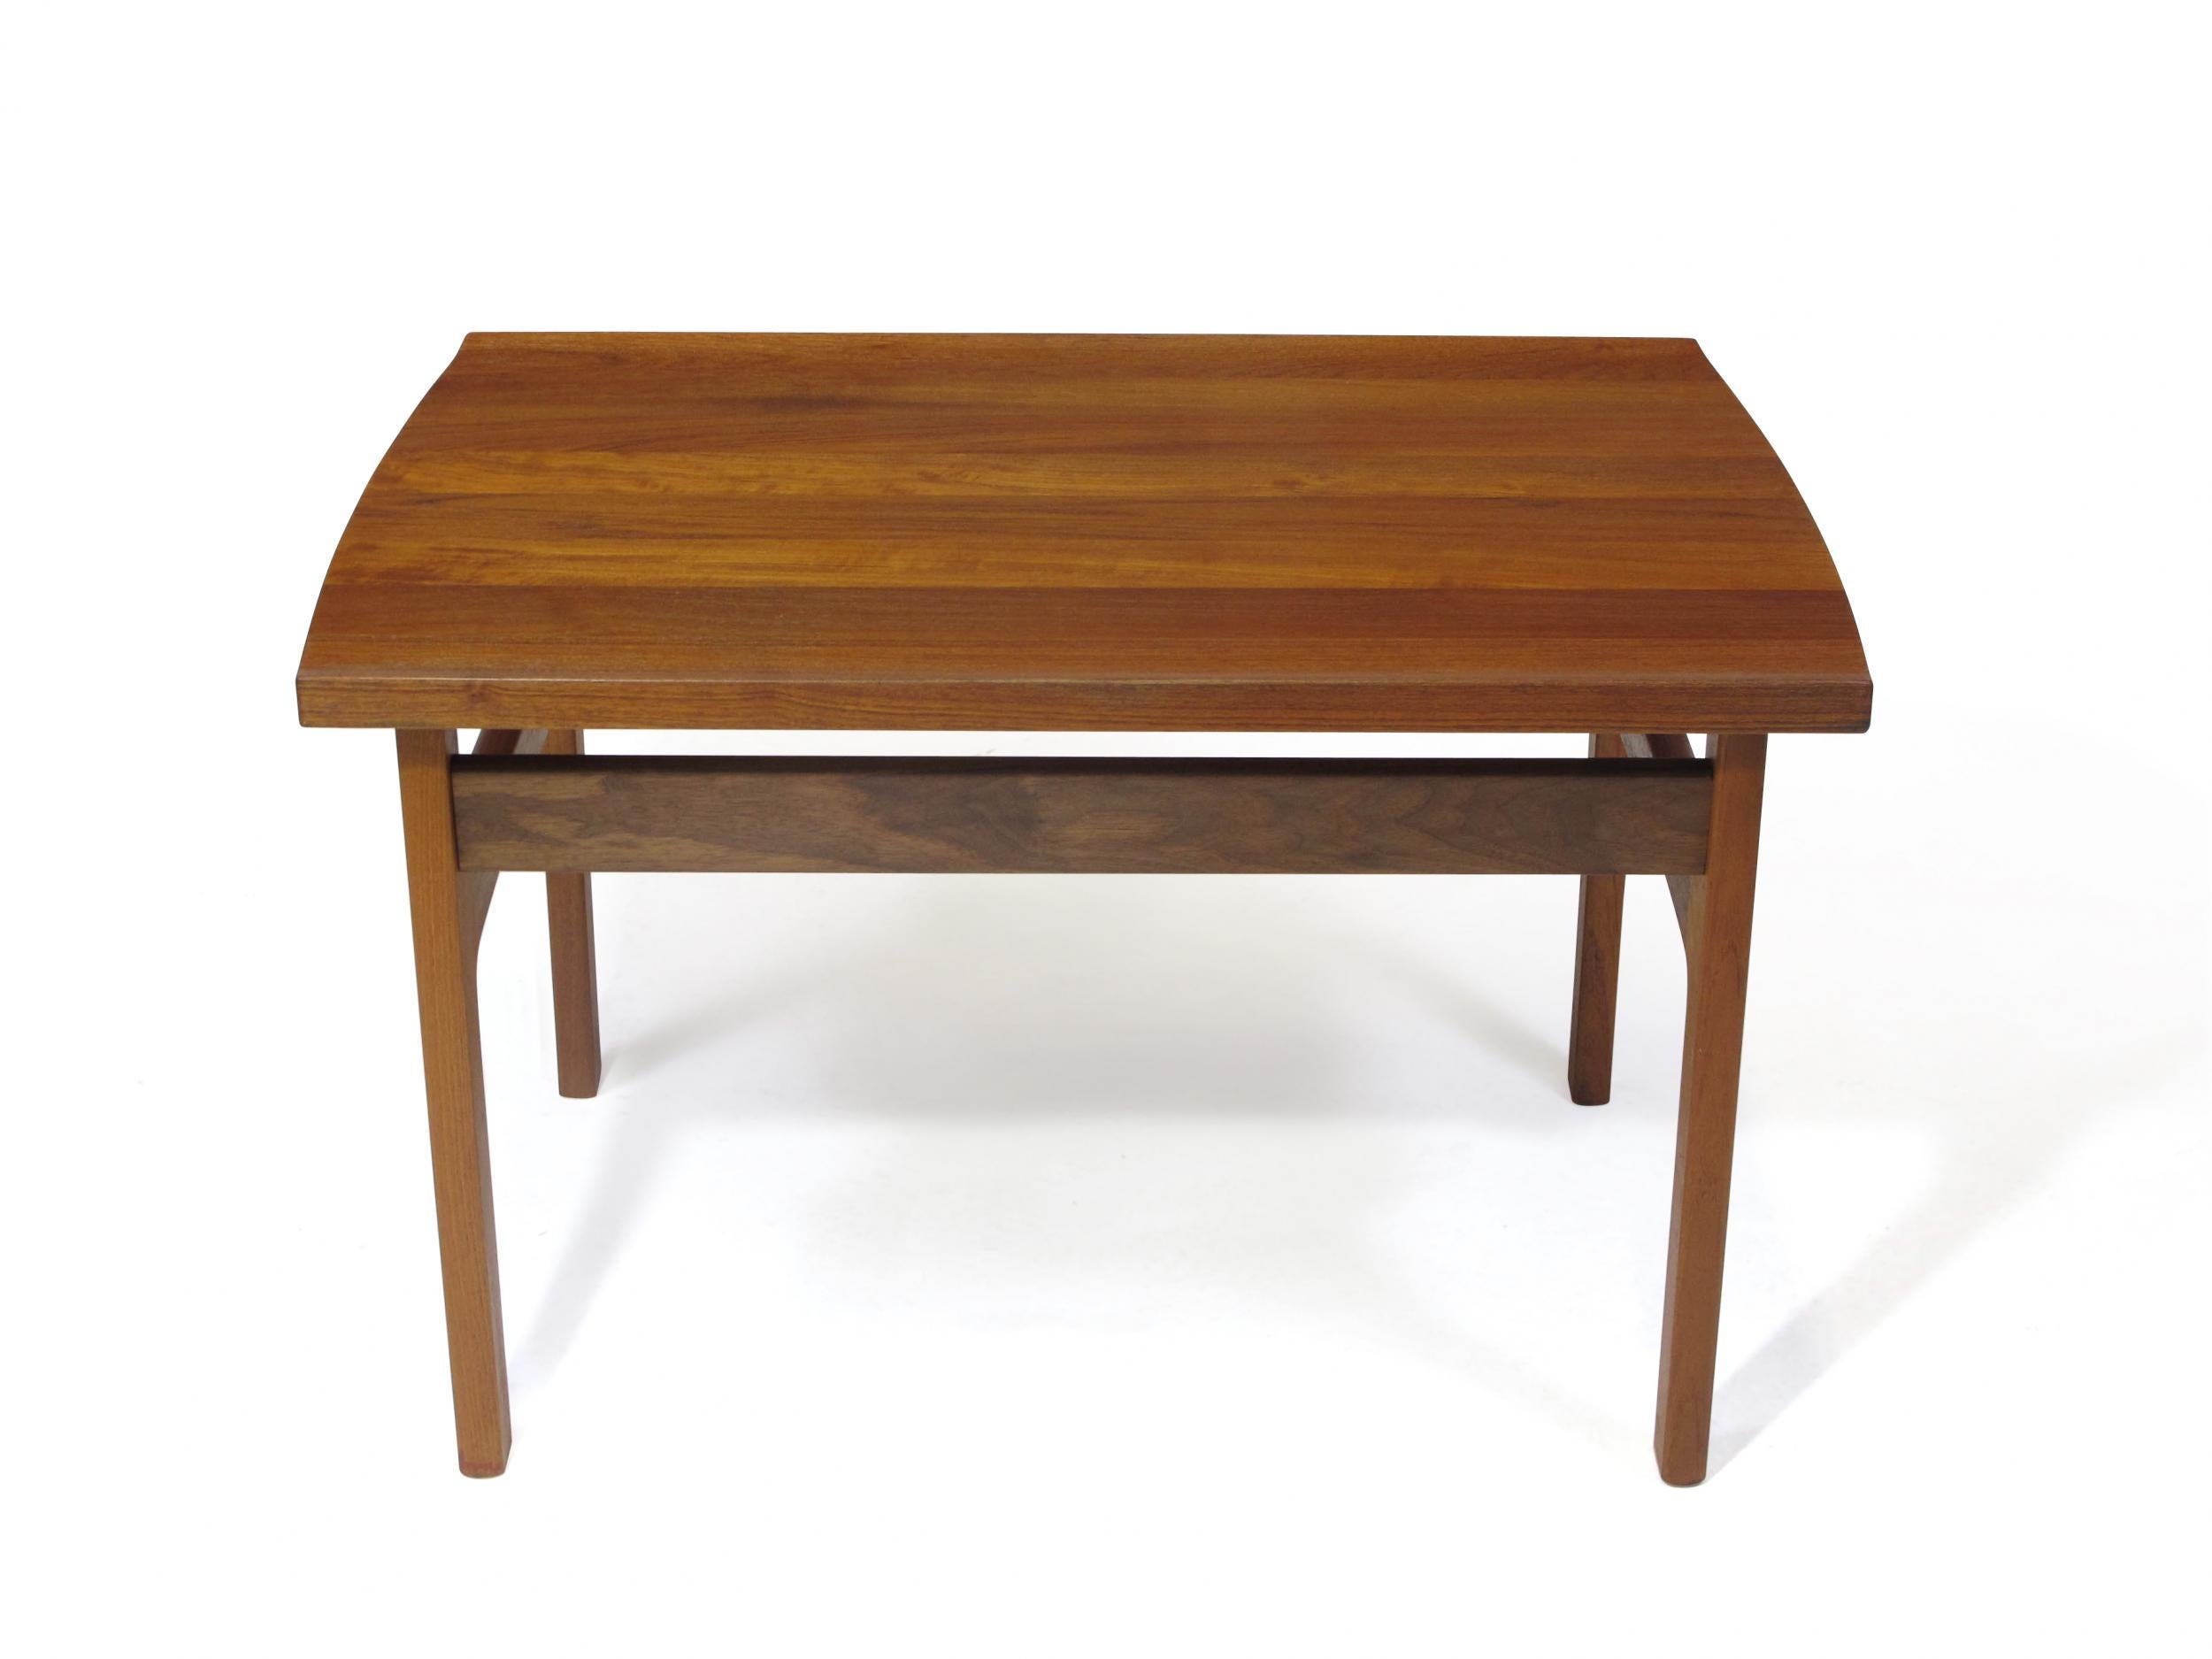 Danish mid century teak coffee table designed by Tove & Edvard Kindt- Larsen for AR- Saffel Moblefabrik, Sweden. Crafted of the solid teak with wood inlay details on both sides. Professionally restored by our team of in-house craftspeople and in